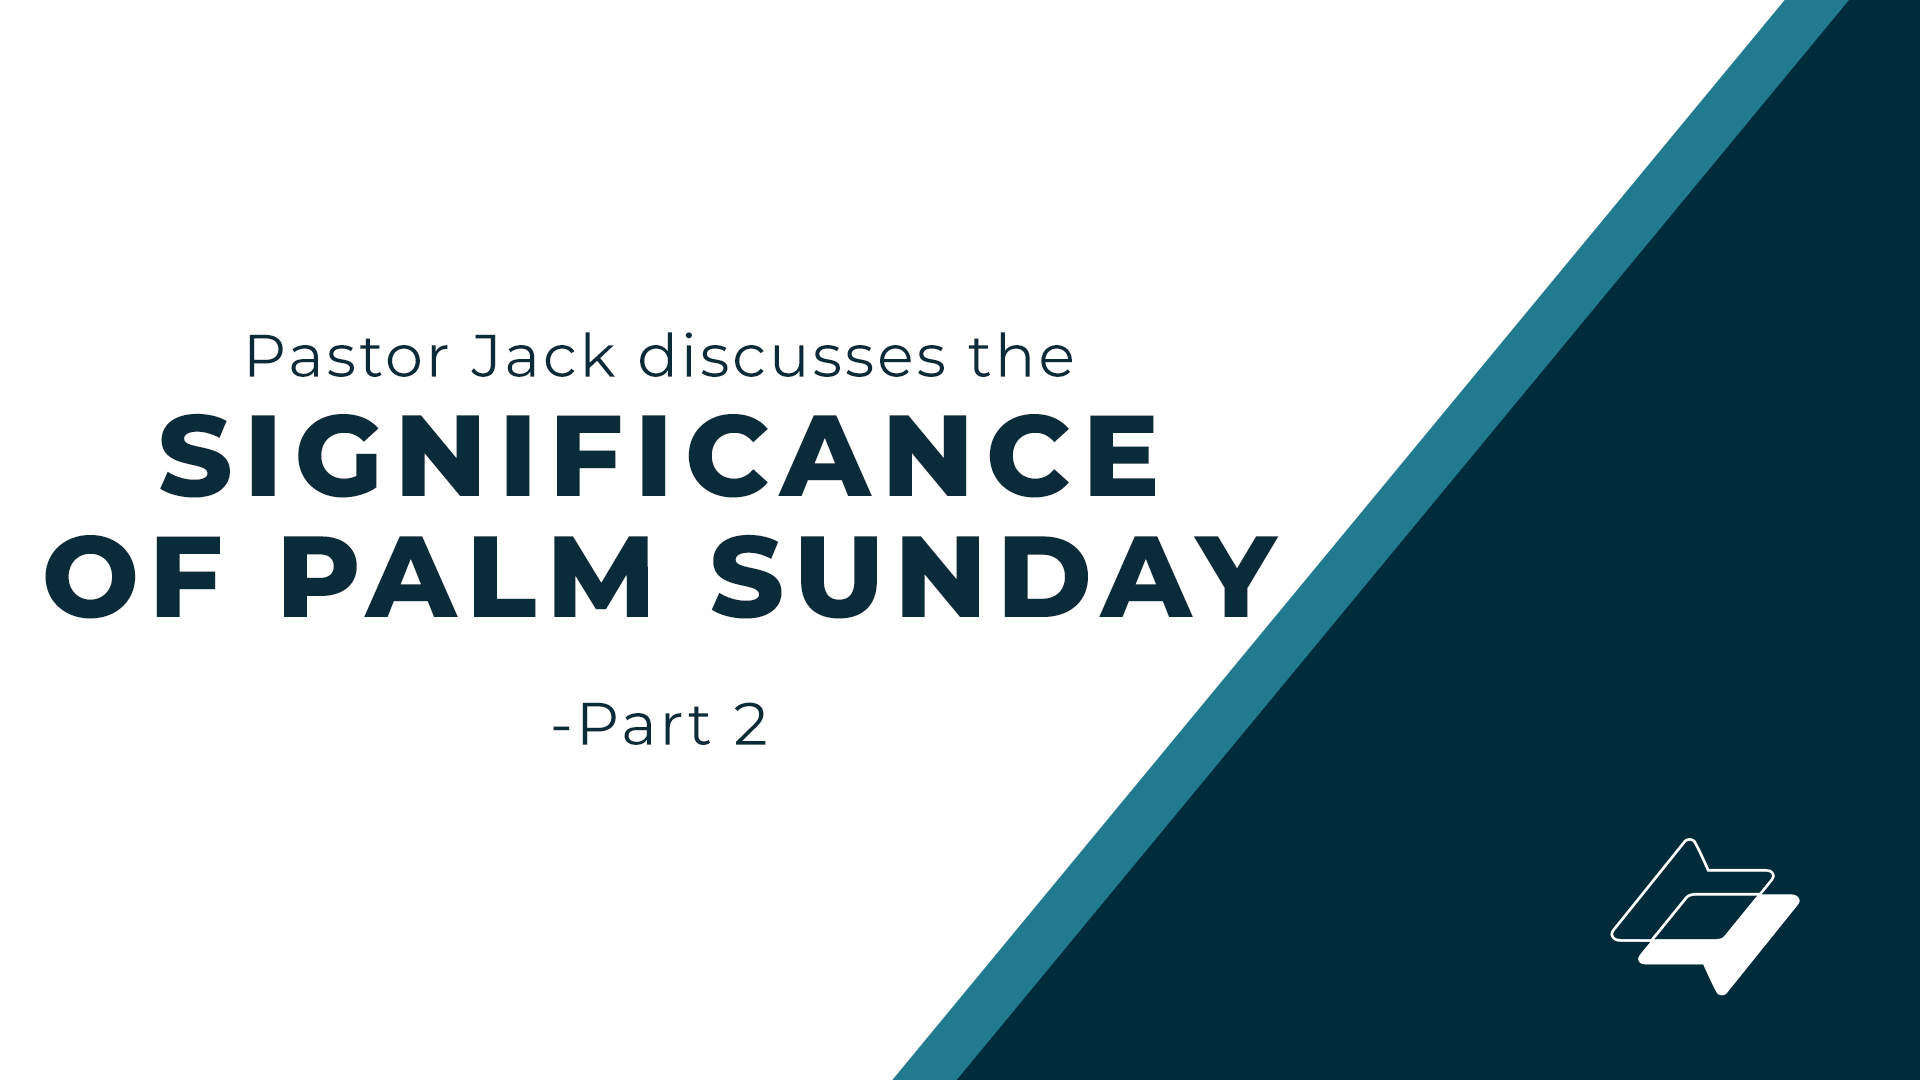 Pastor Jack discusses the significance of Palm Sunday – Part 2